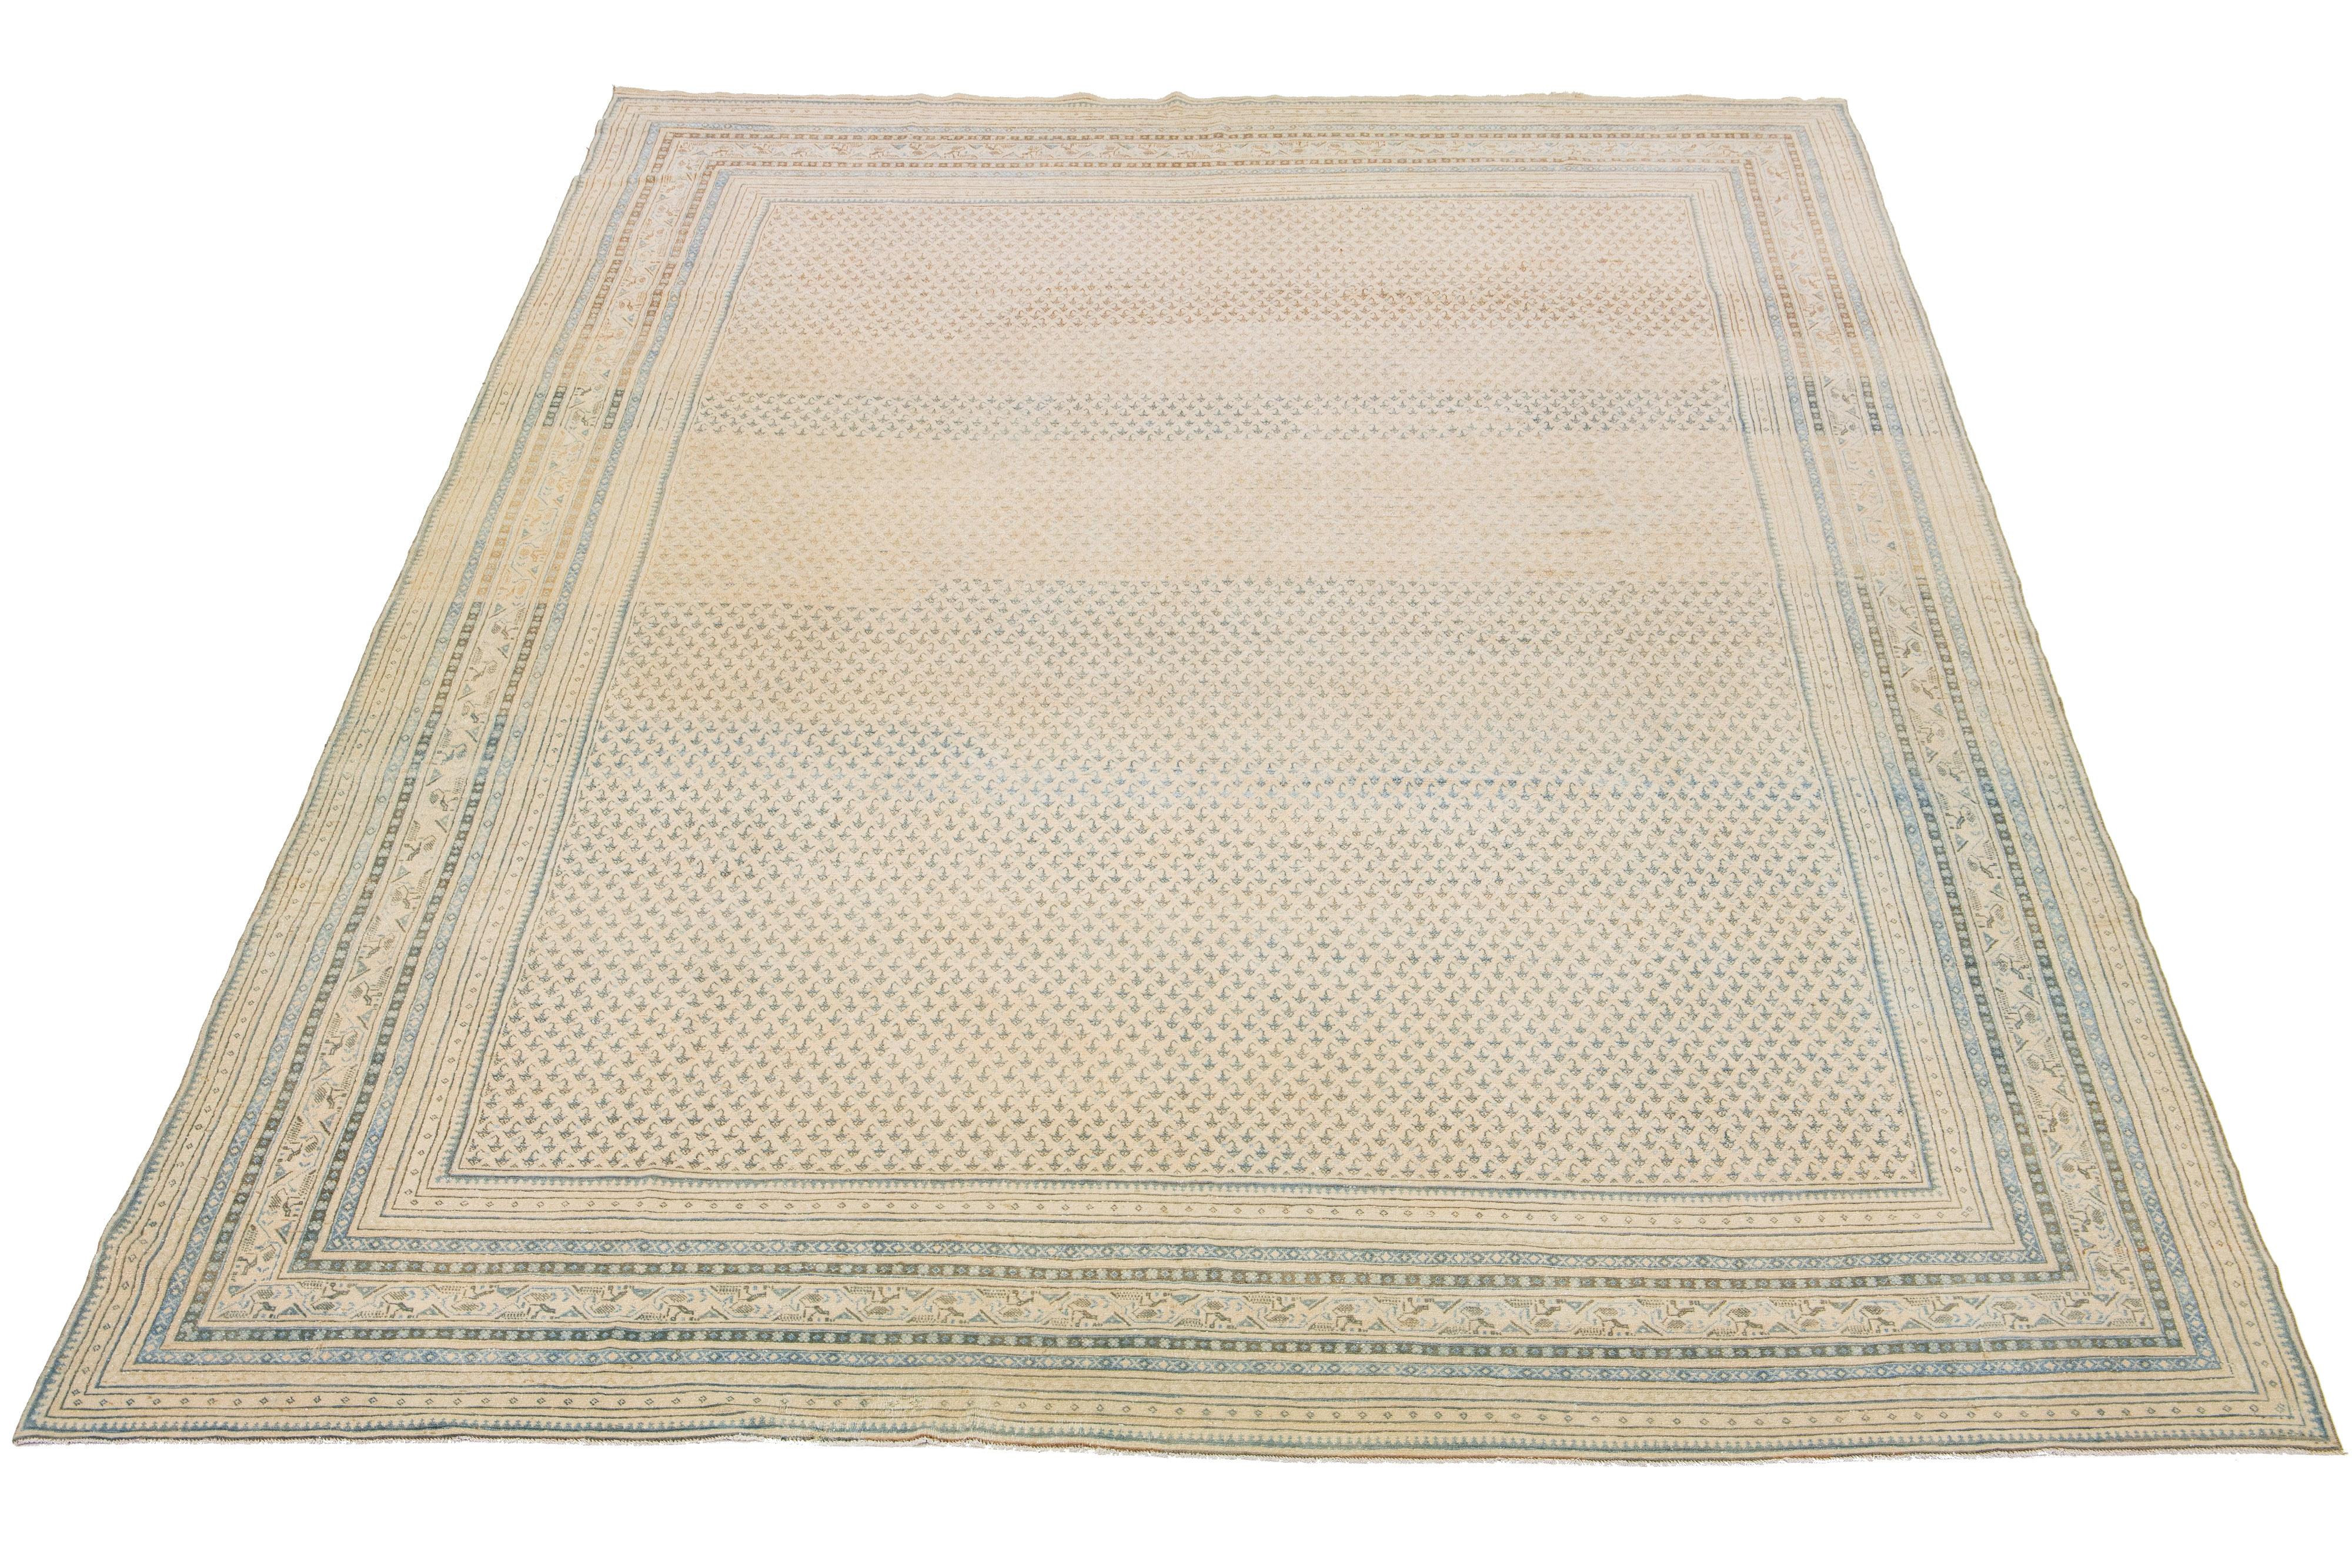 This Persian Malayer rug is an antique piece of hand-knotted wool. It features a beautiful beige field adorned with blue highlights, all arranged in a timeless classical pattern.

This rug measures 10'11